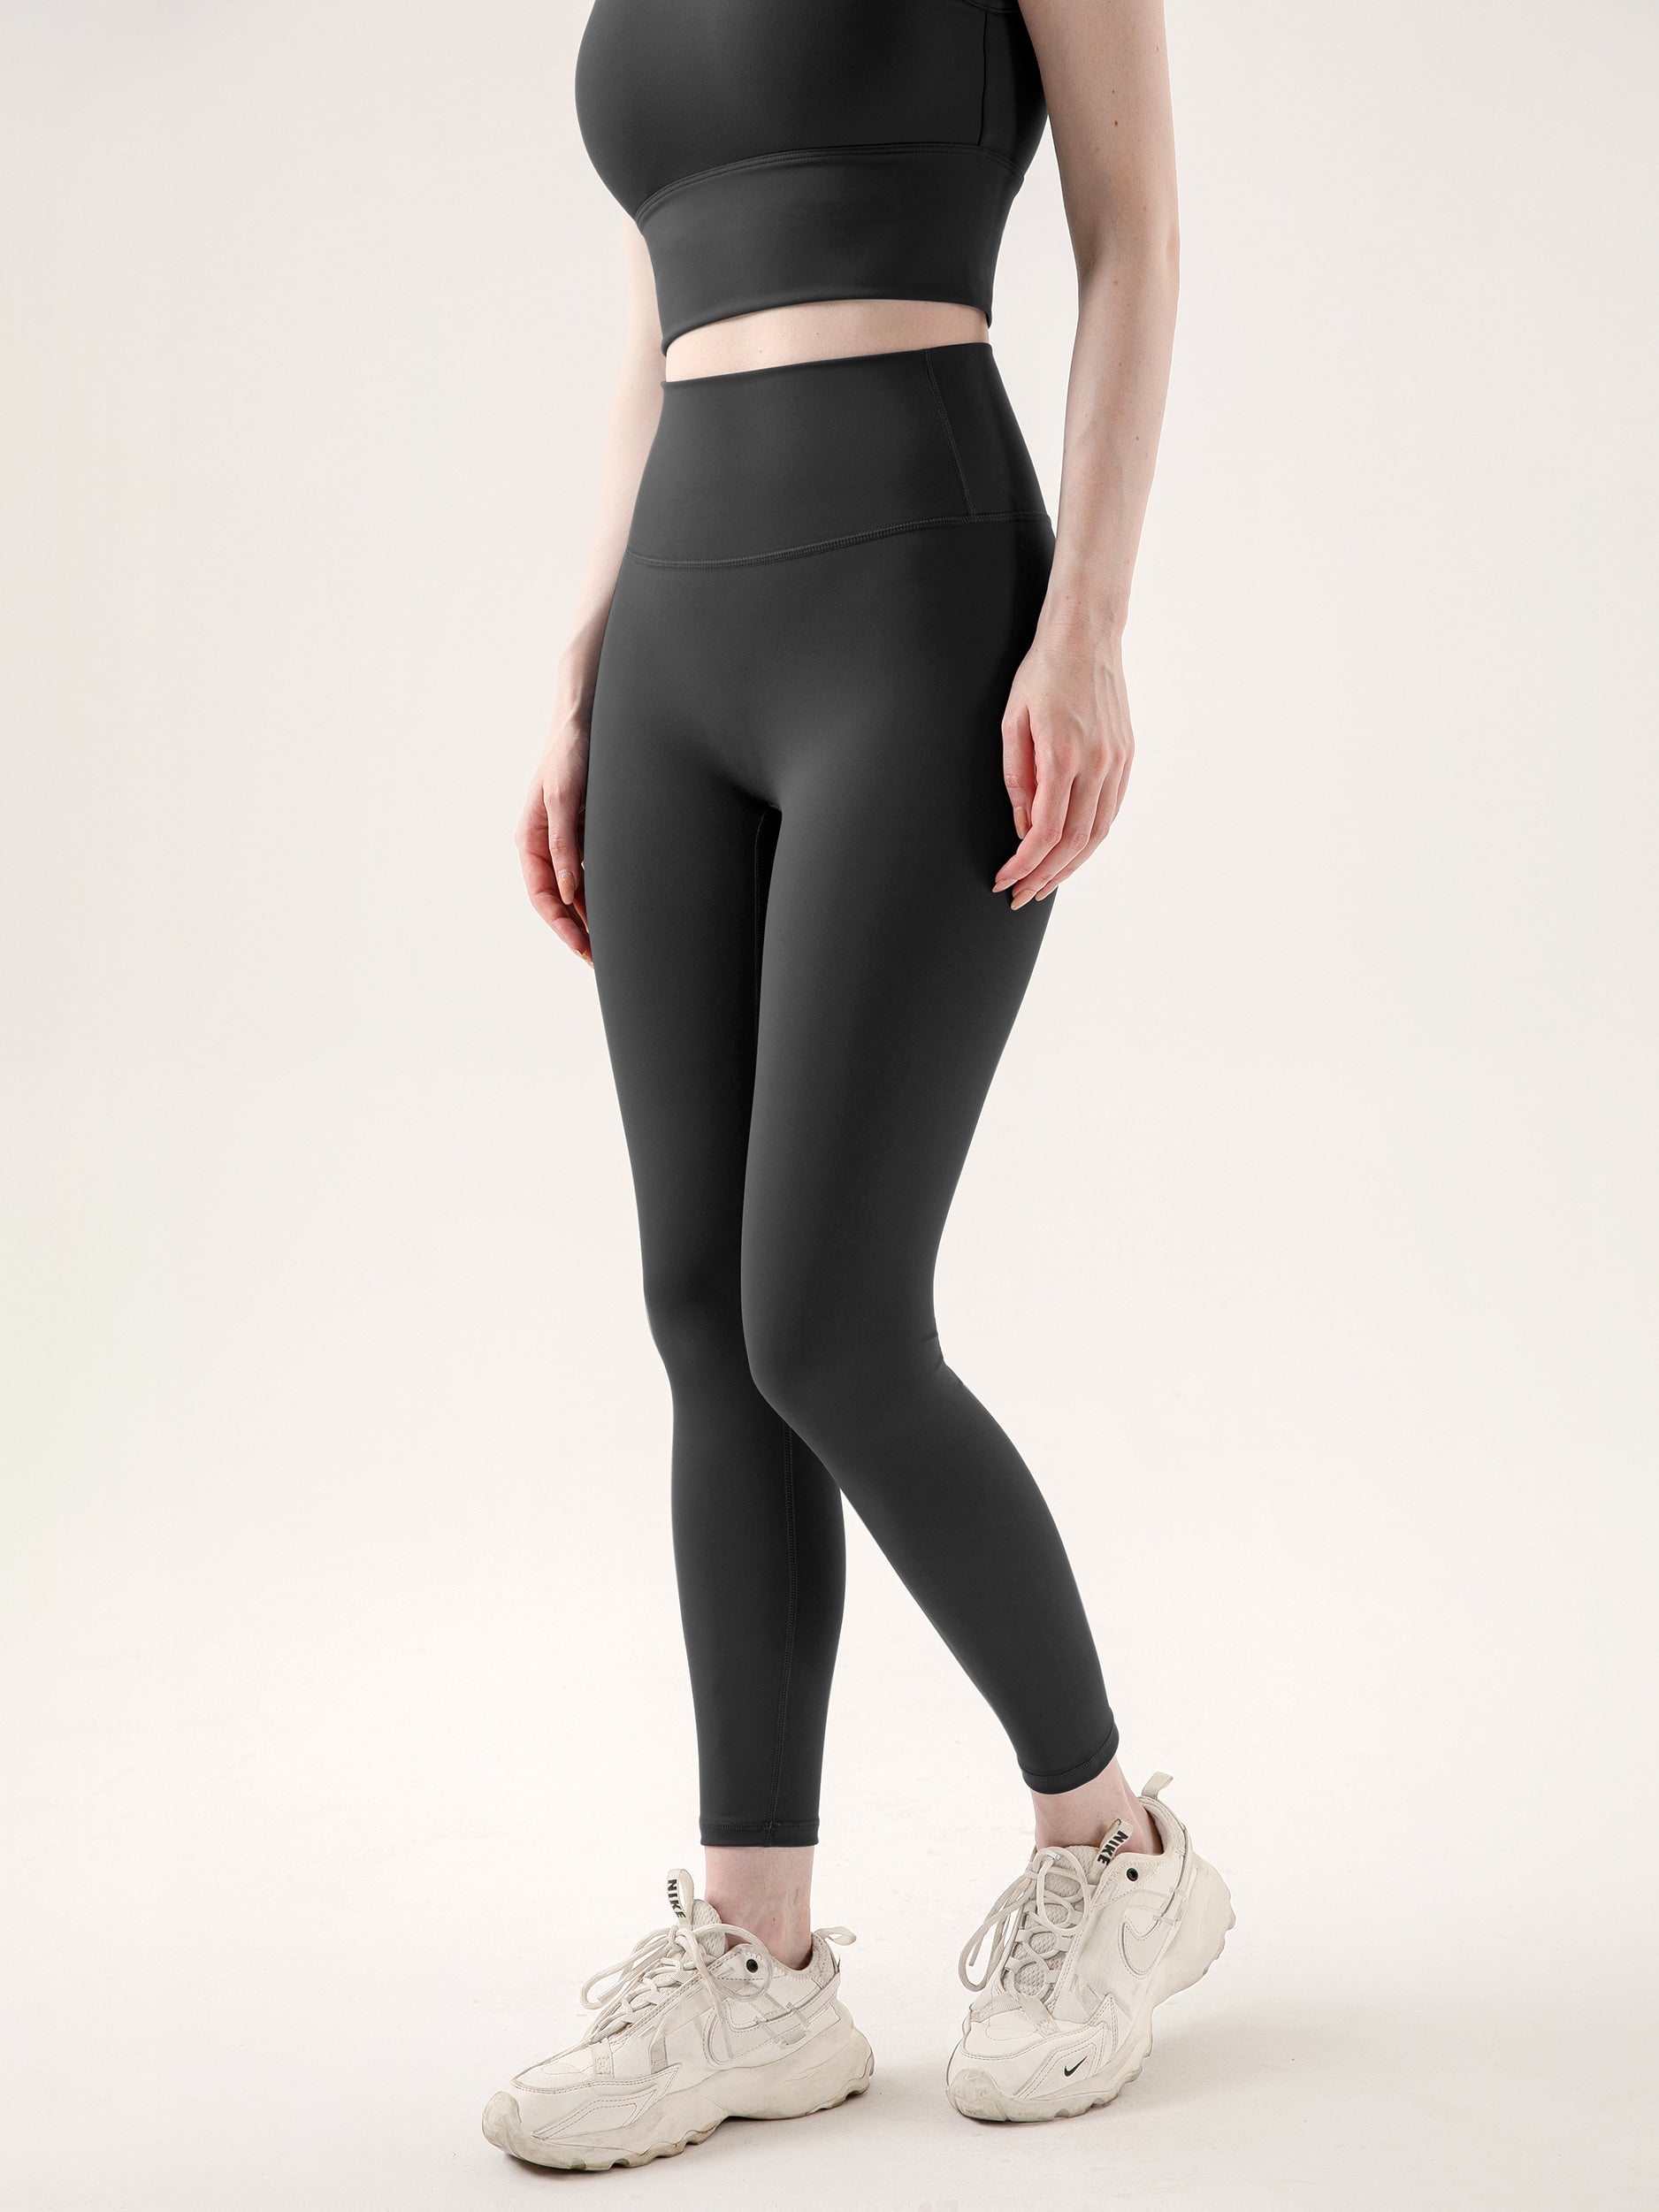 Vital 'n' Free Leggings - Core Olive: Breathe Easy, Move Freely – Click  Holic Activewear